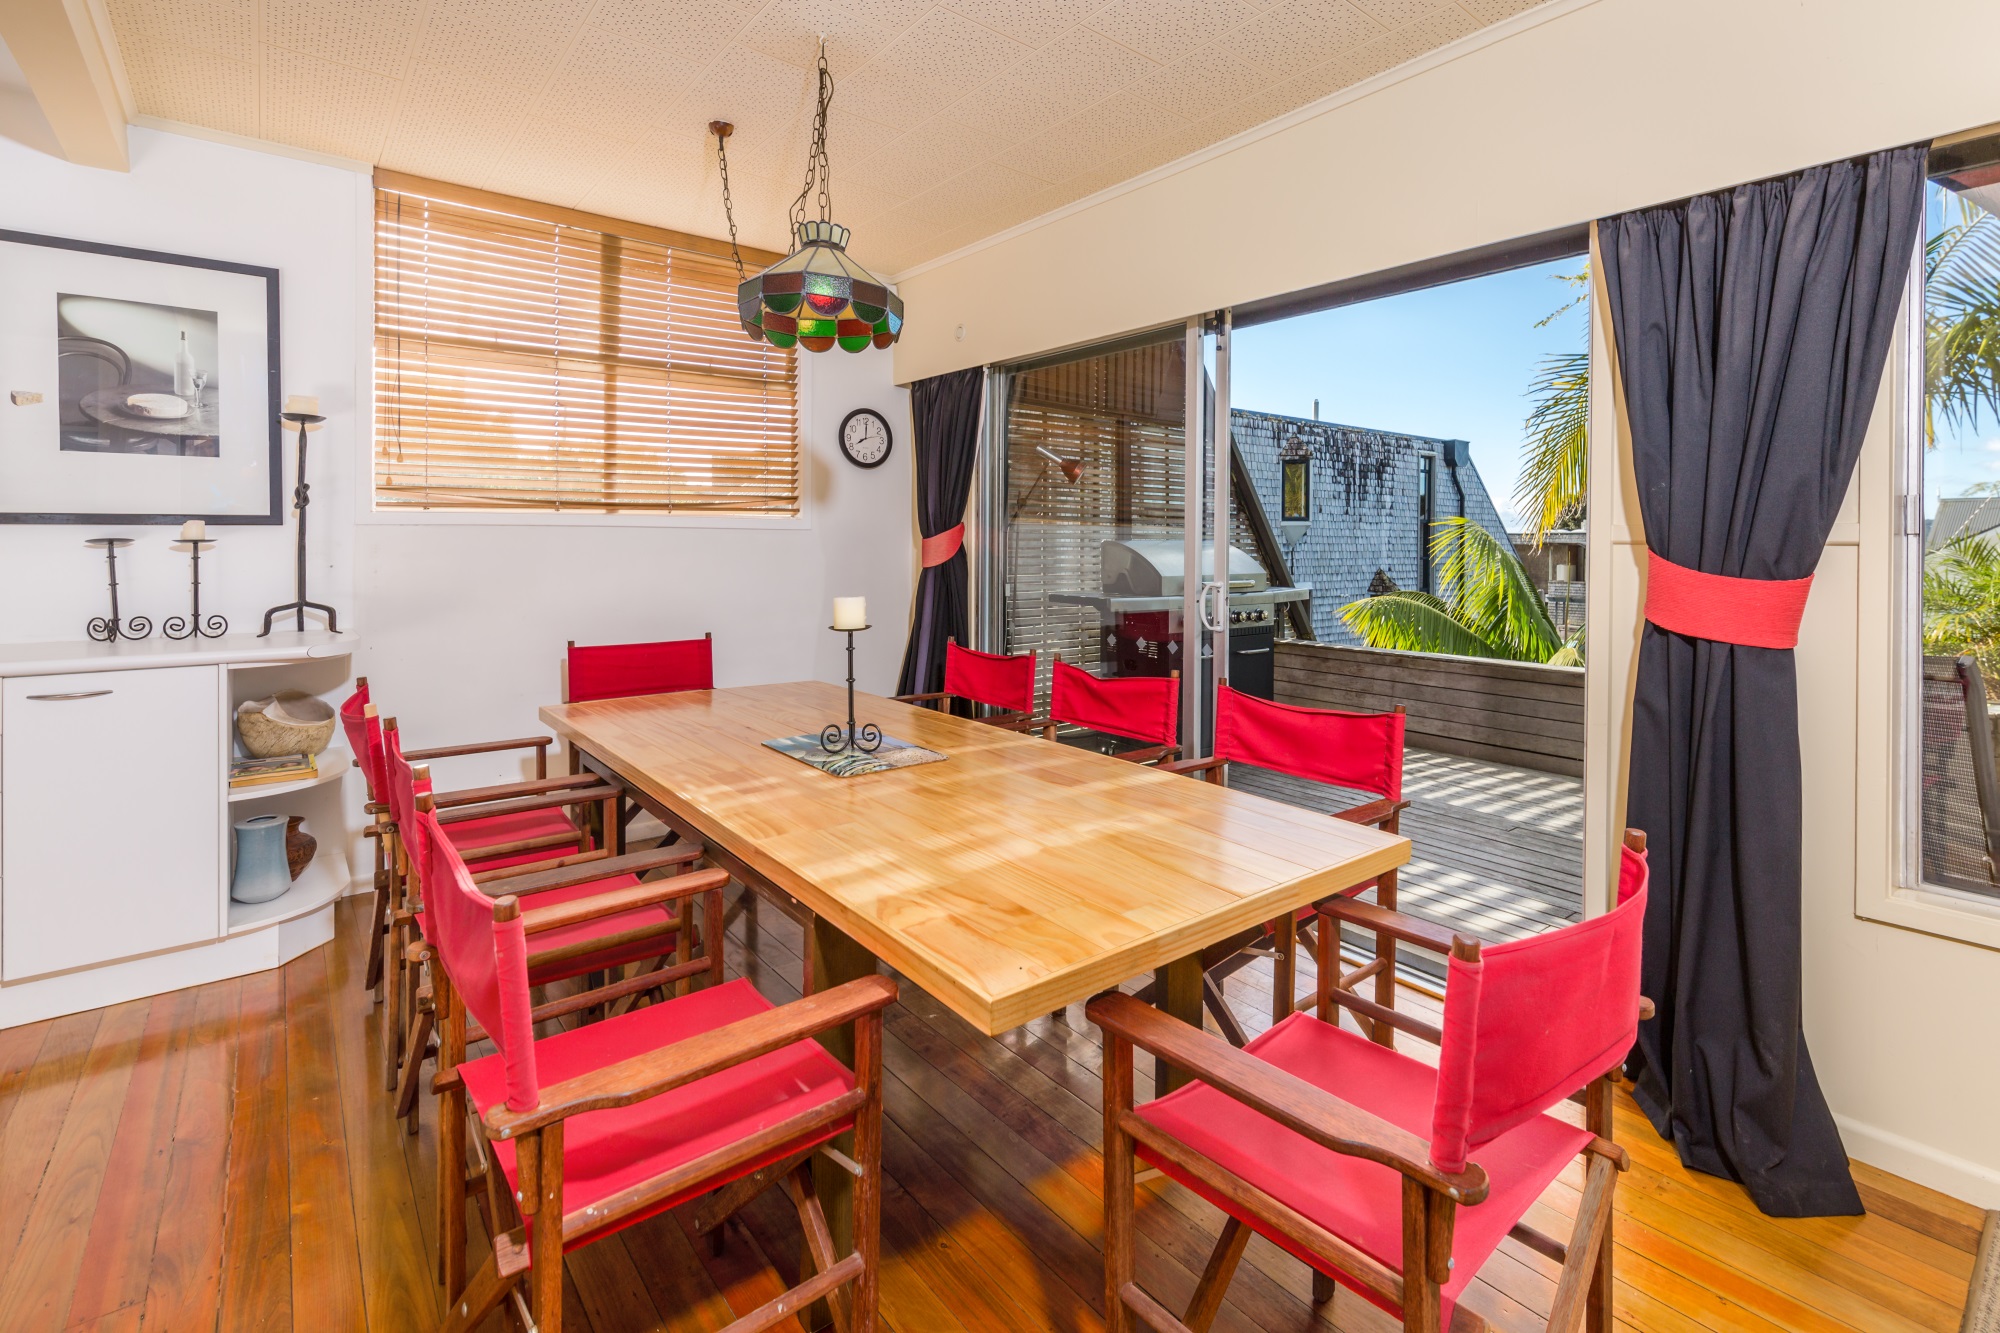 Holiday House Rental Paihia. Waterfront holiday home accommodation just across the road from the beach, 200 metre flat walk to Paihia & the wharf